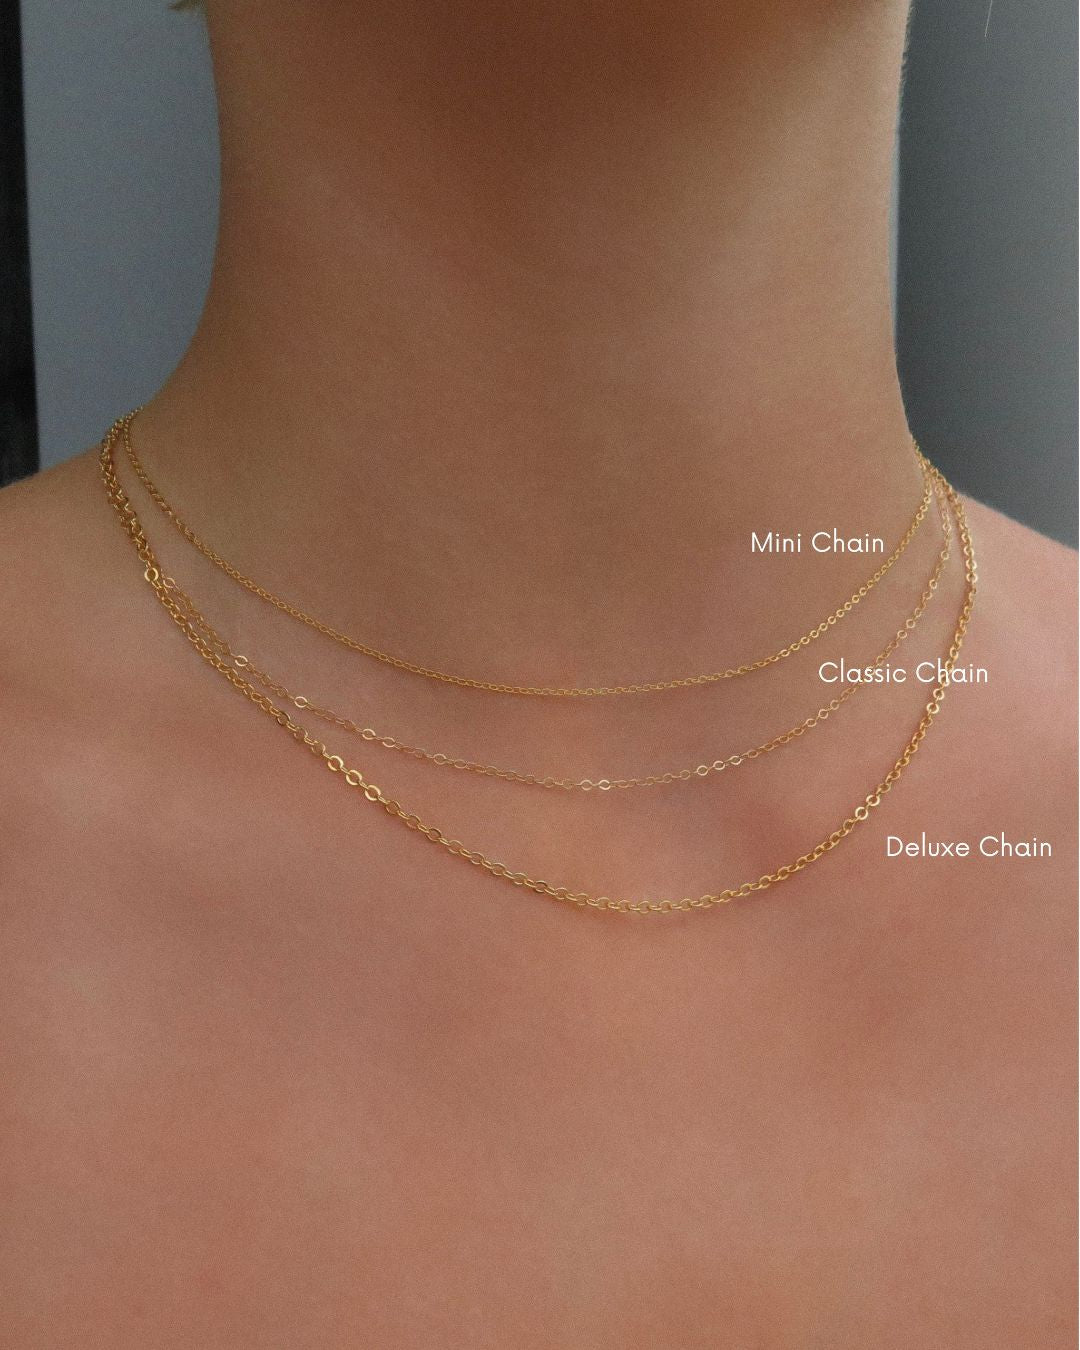 Cross Drop Necklace  - 14k Yellow Gold Fill